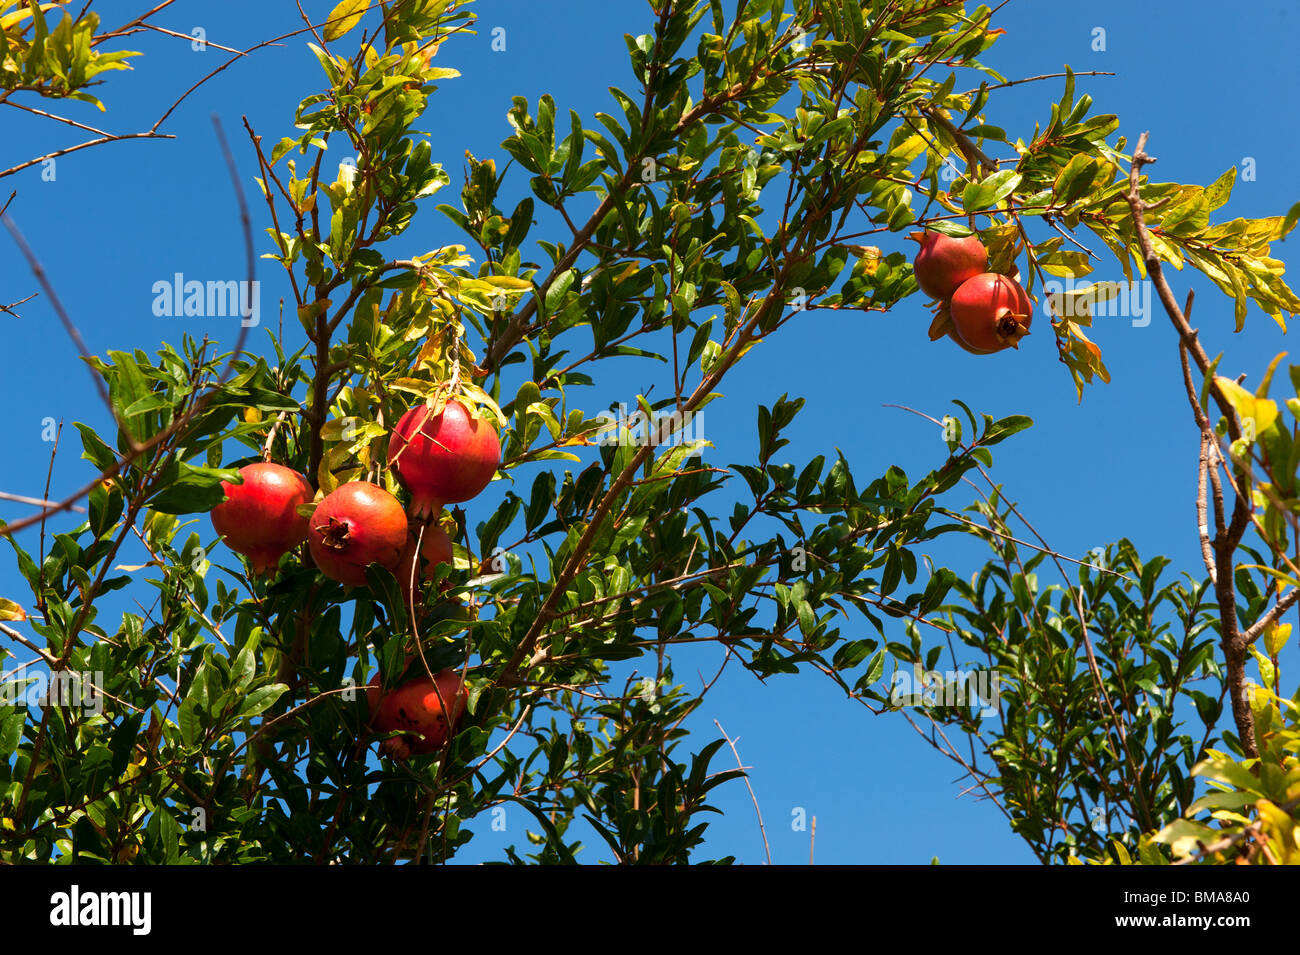 almost ripe pomegranate fruit hanging in the tree Stock Photo